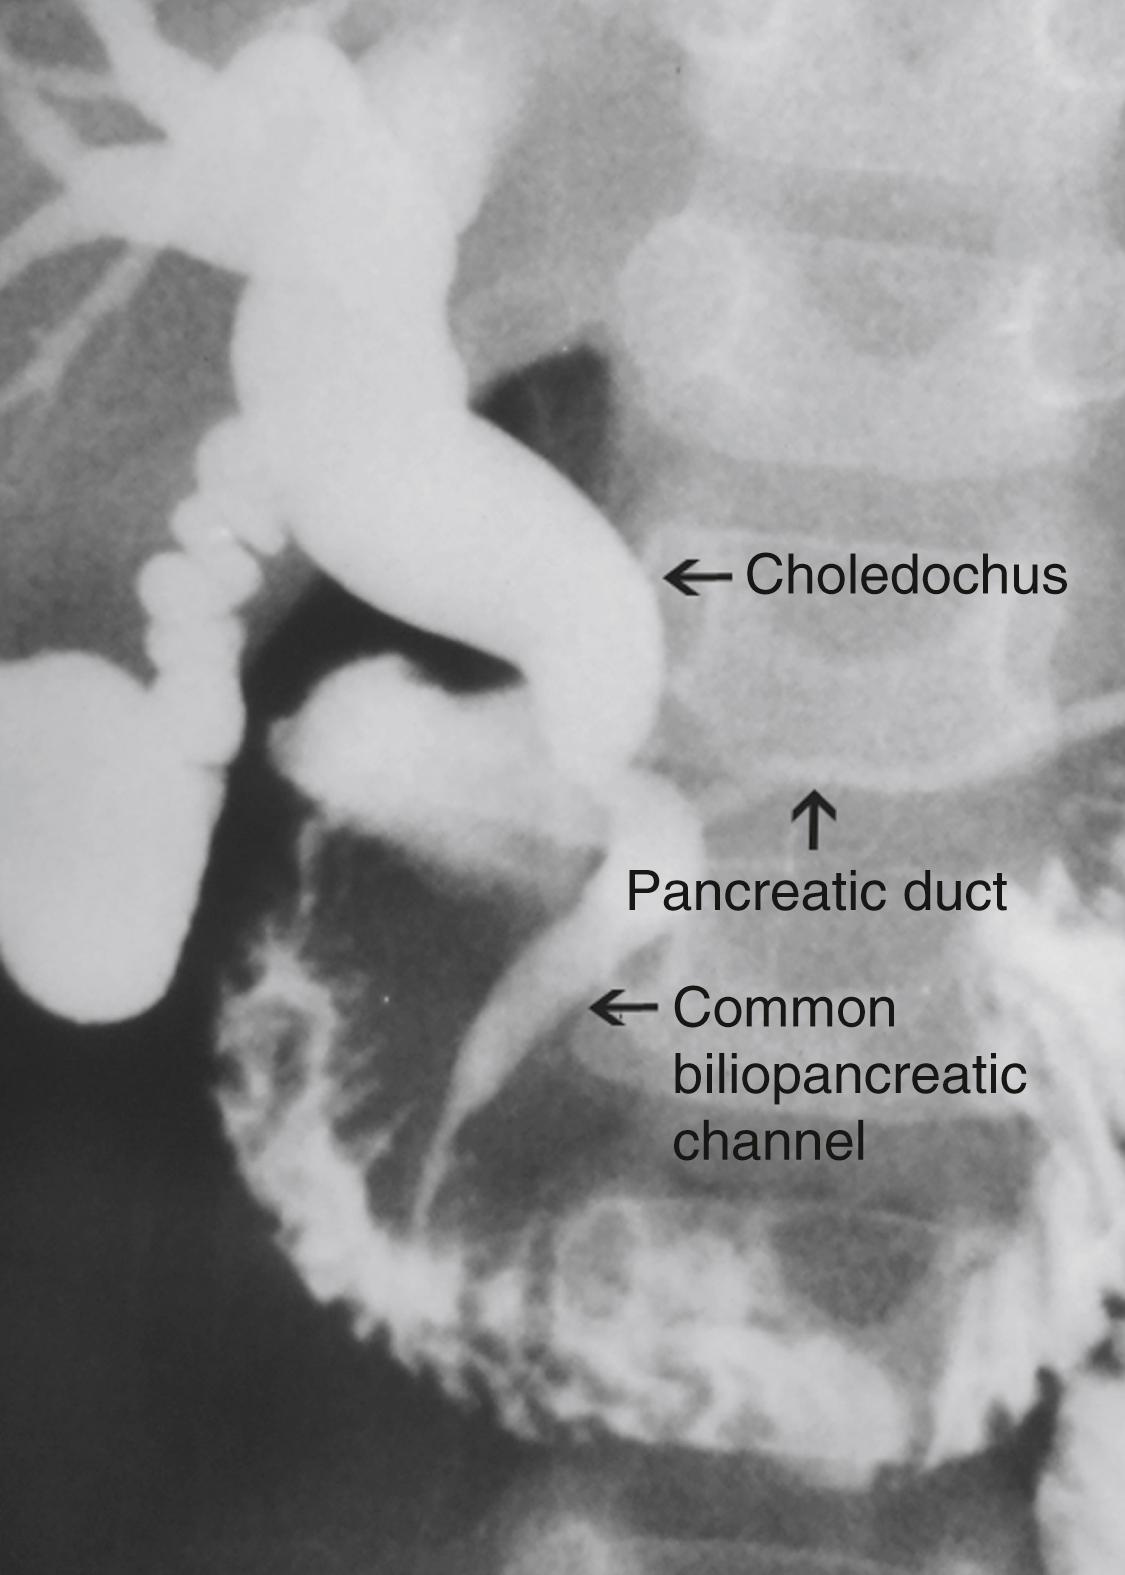 Fig. 44.2, This contrast study depicts a long common biliopancreatic channel that allows reflux of pancreatic secretions into the biliary tree. A long common biliopancreatic channel is thought to be the etiology of an acquired choledochal cyst.